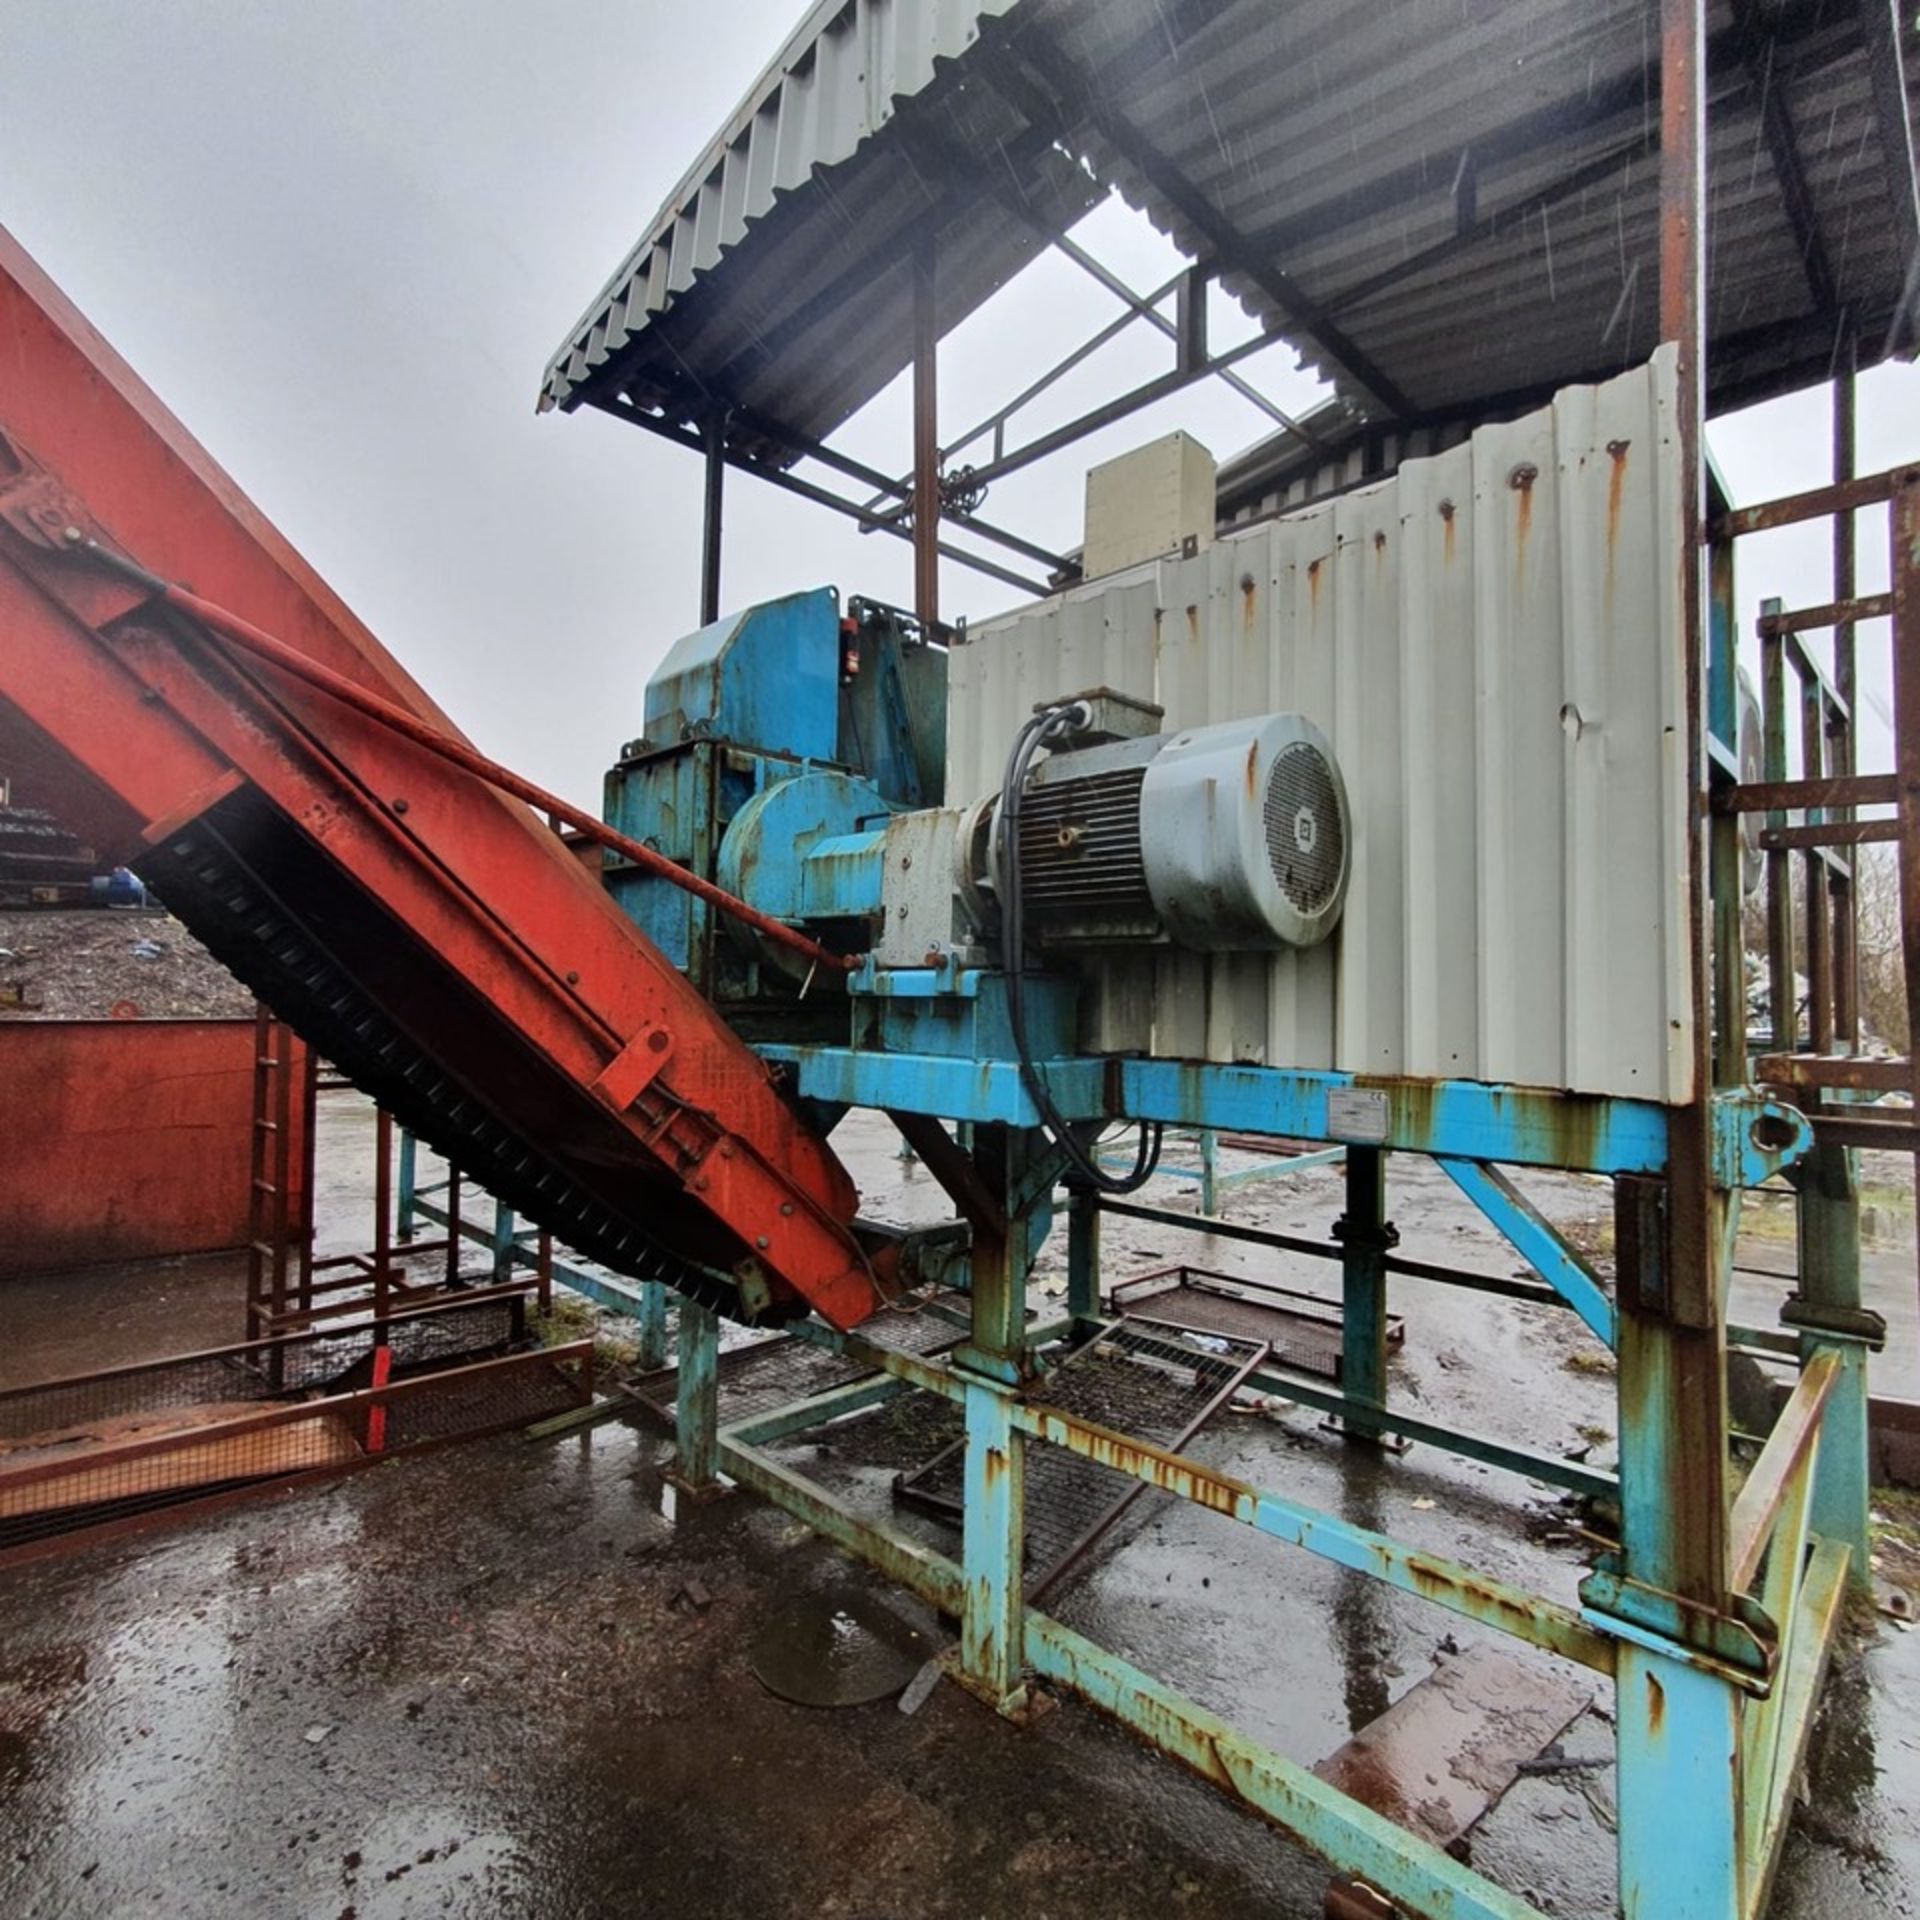 Wood Processing Shredder - Laimet Screw Type Wood Chipper, believed to be a model LS 280 built in - Image 3 of 4